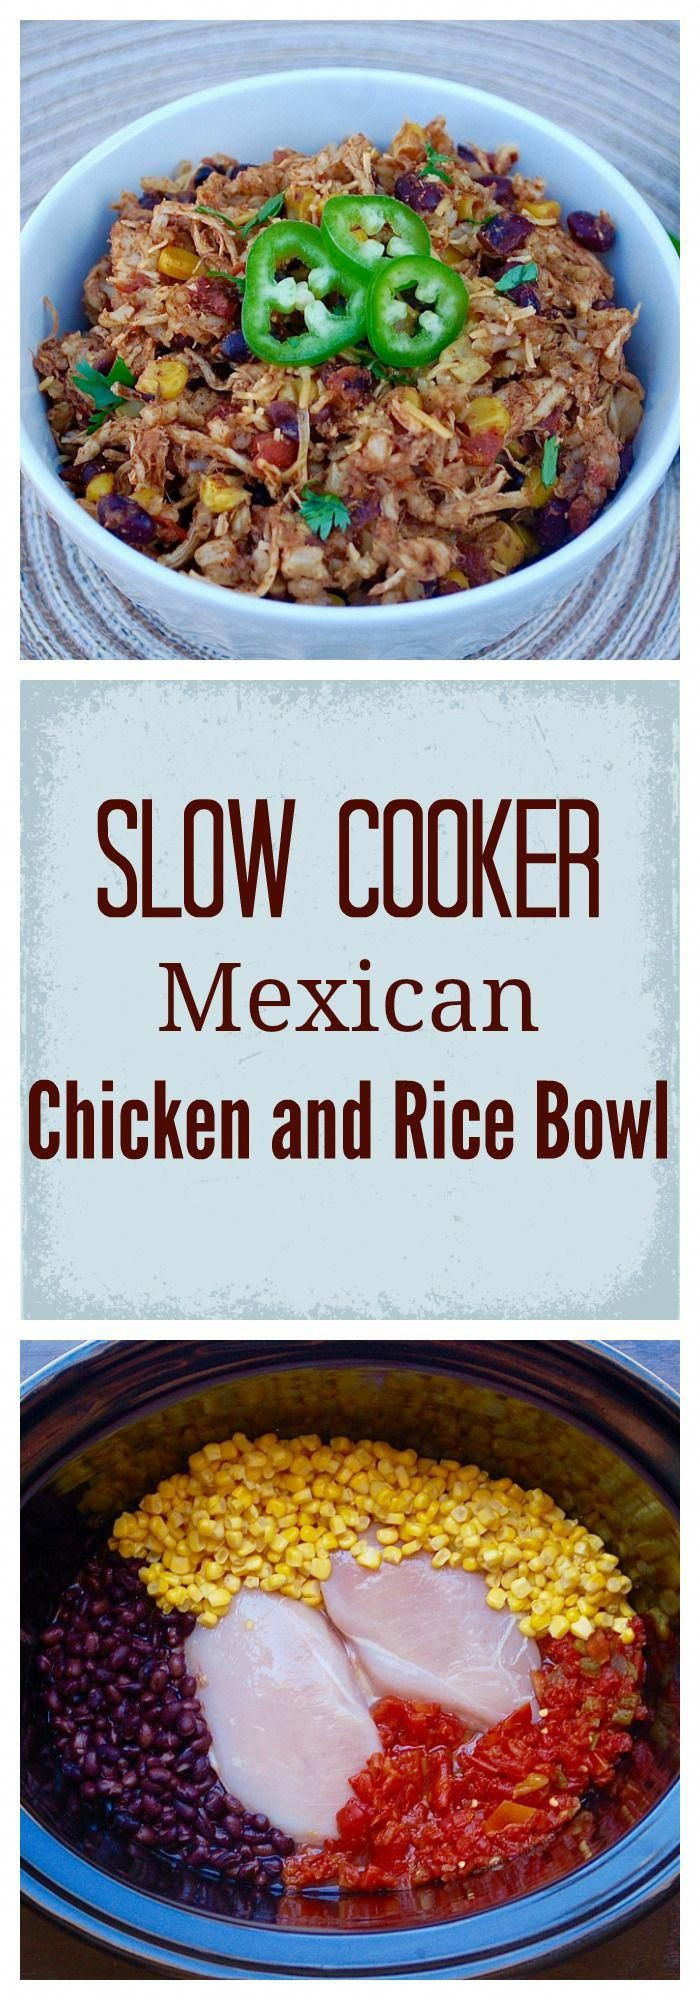 Mexican Super Bowl Recipes
 Slow Cooker Mexican Chicken and Rice Bowl Recipe